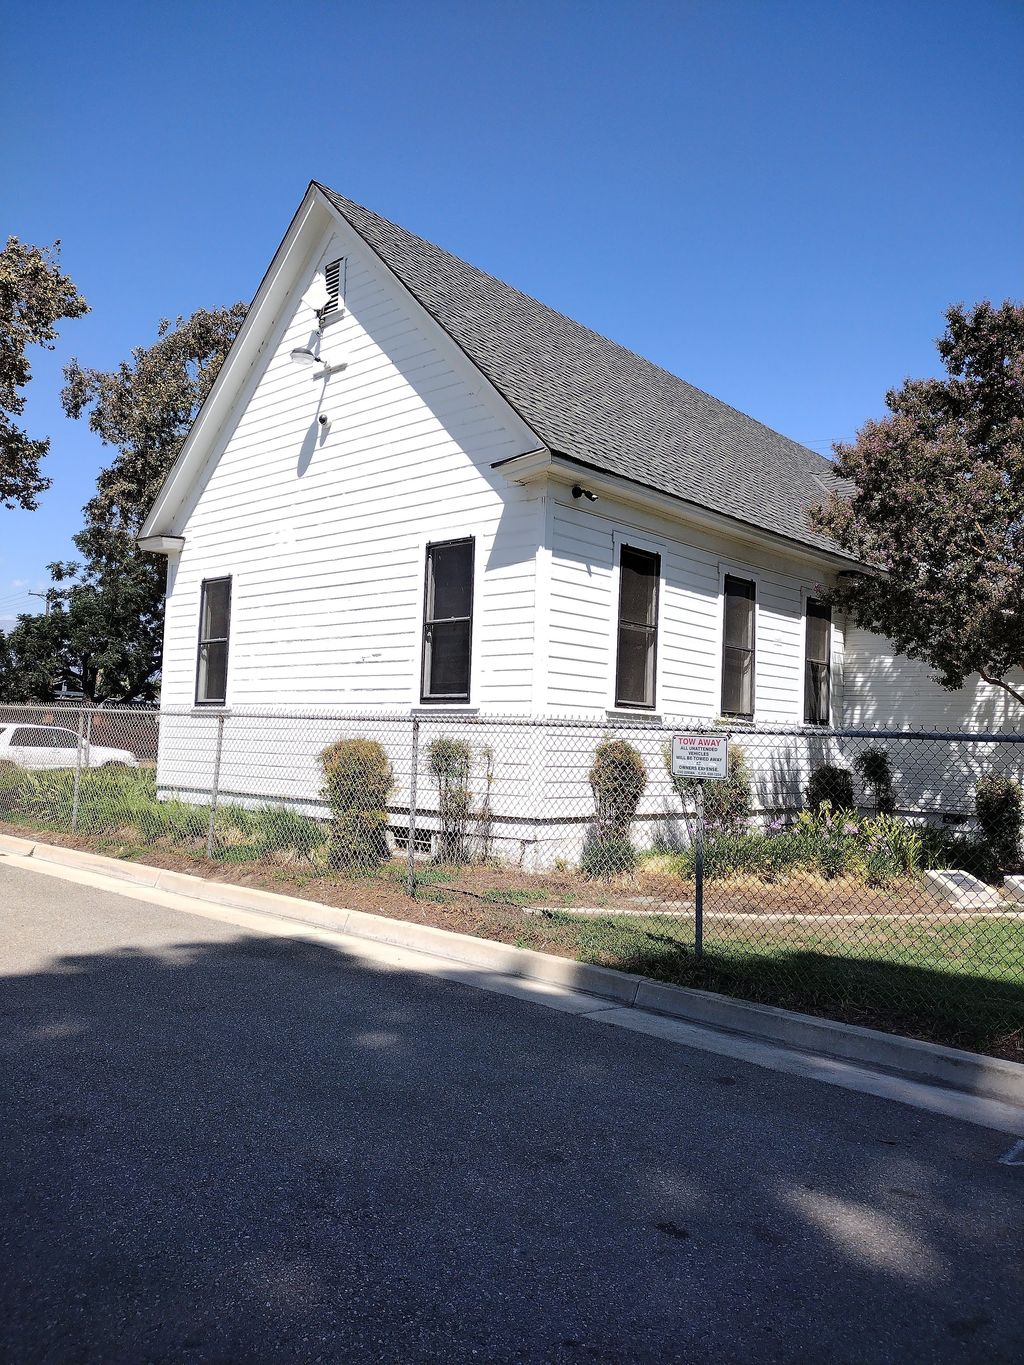 Chino's Old Schoolhouse Museum